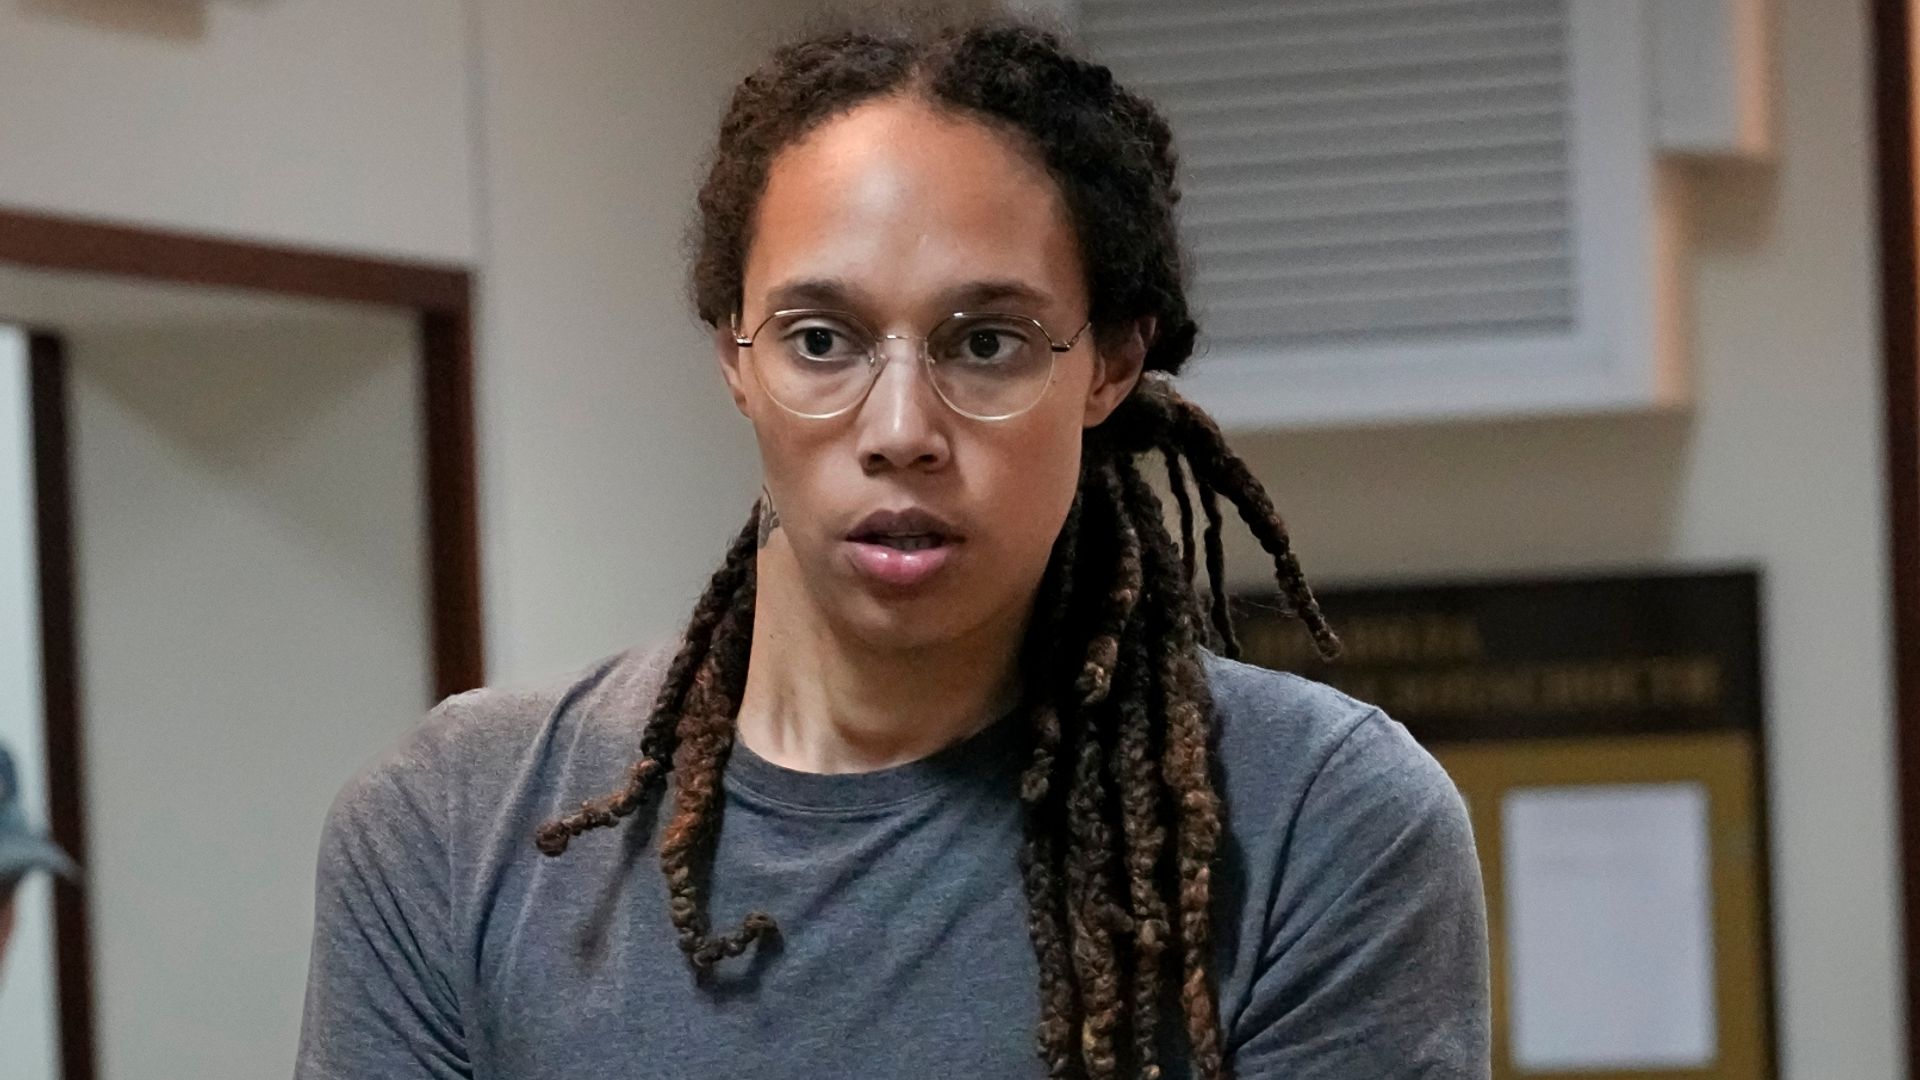 Russian court sets Griner appeal hearing for October 25